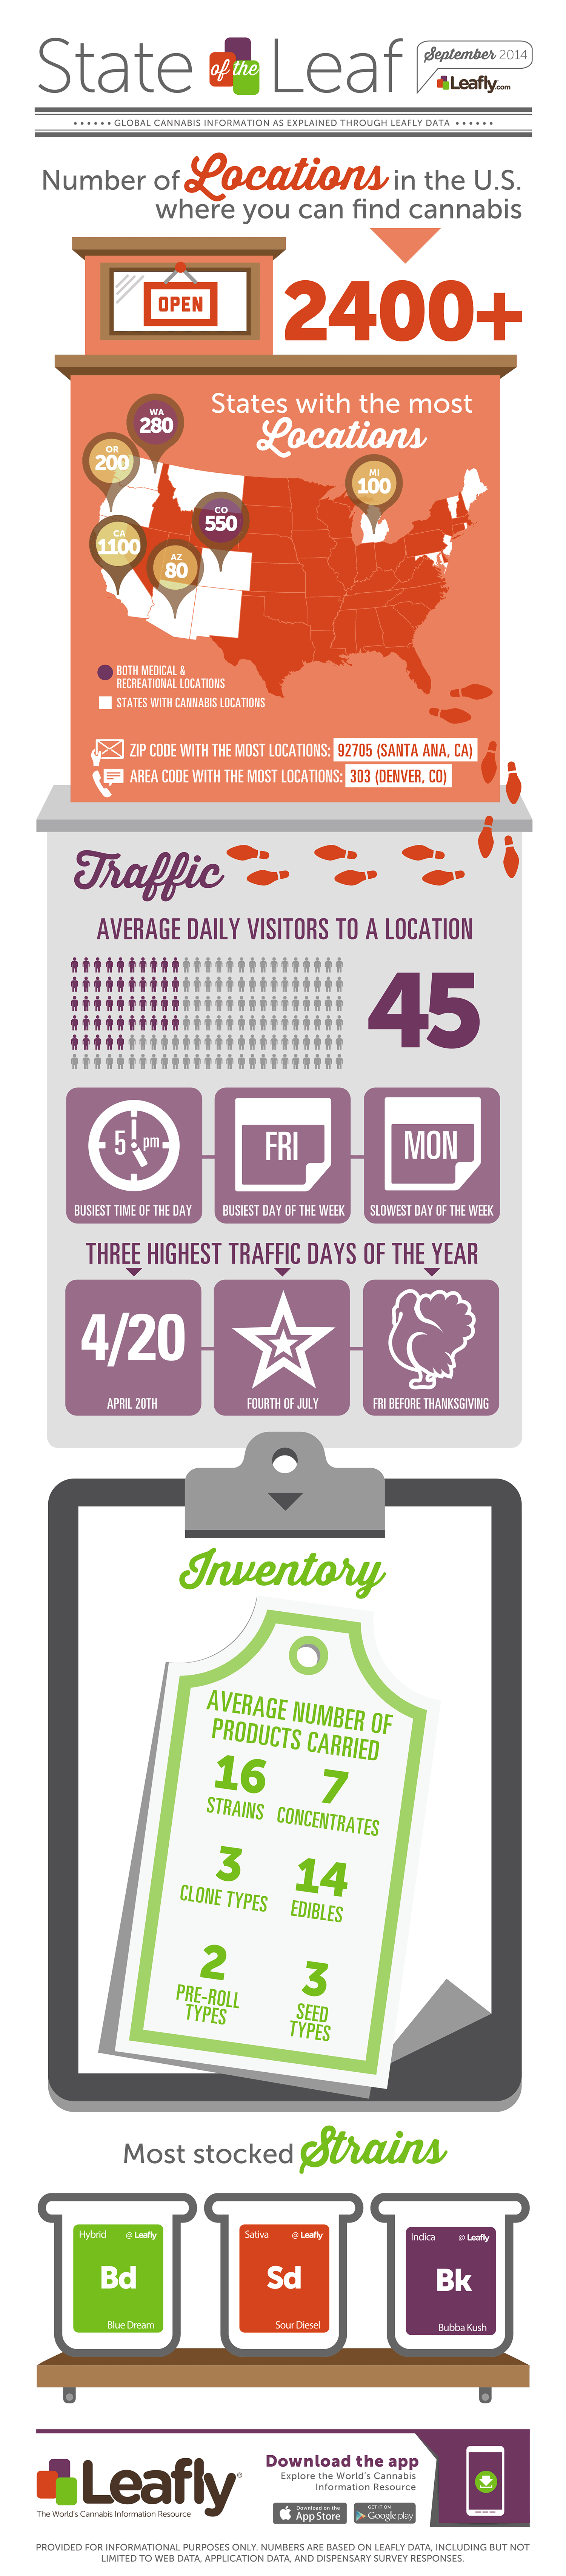 Leafly State of the Leaf Cannabis Infographic